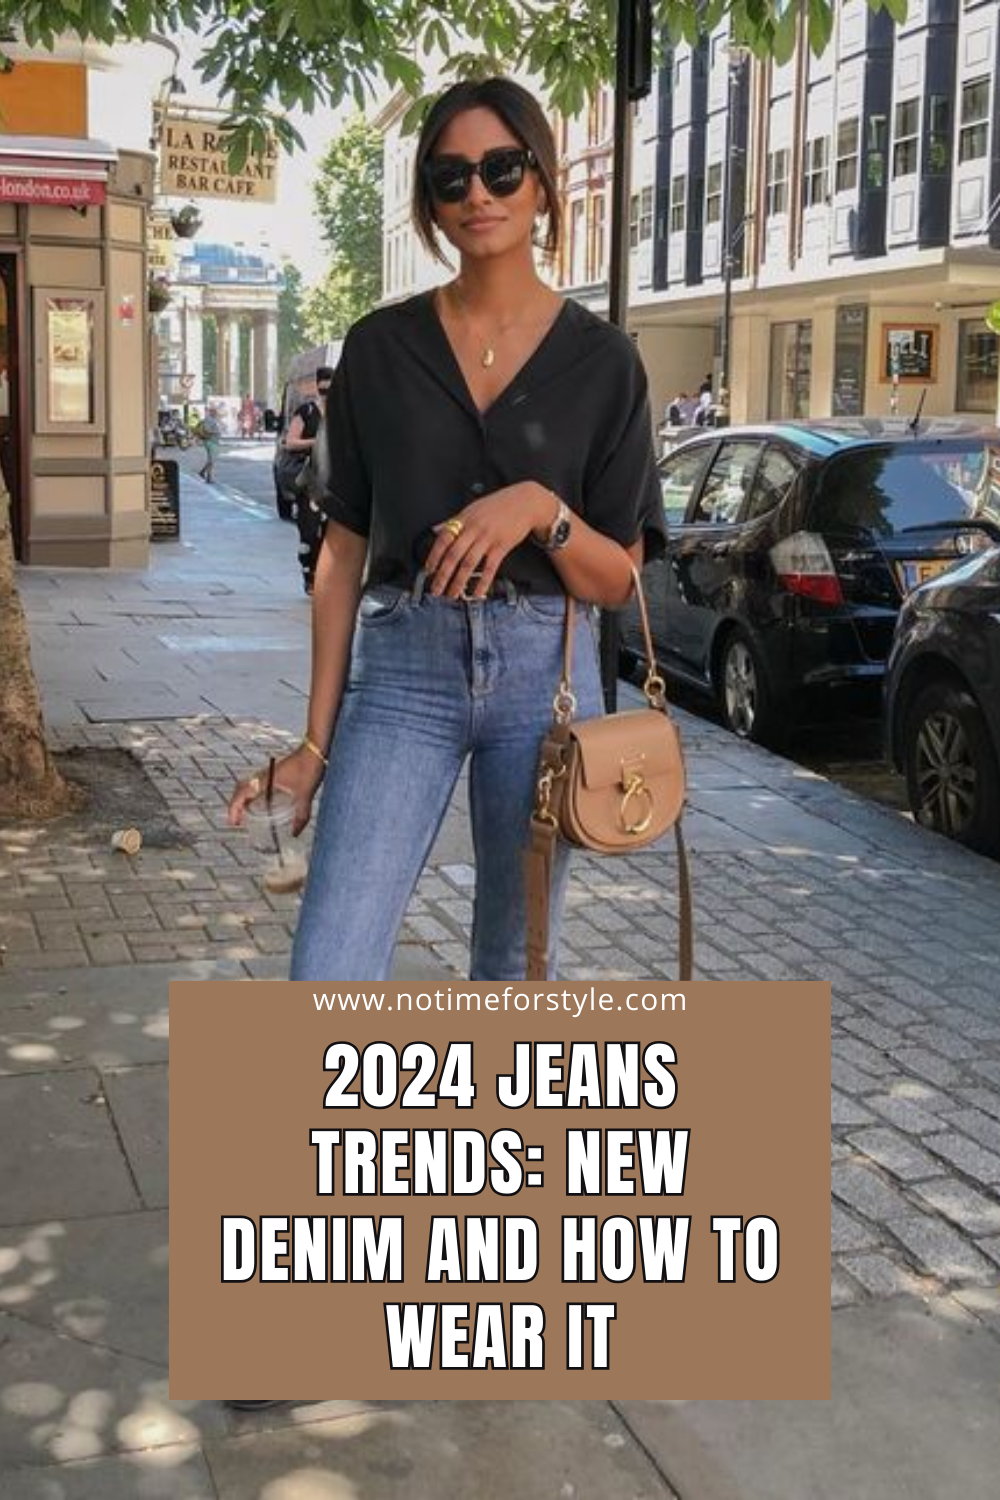 How to style bootcut jeans for 2023: 7 outfits to try